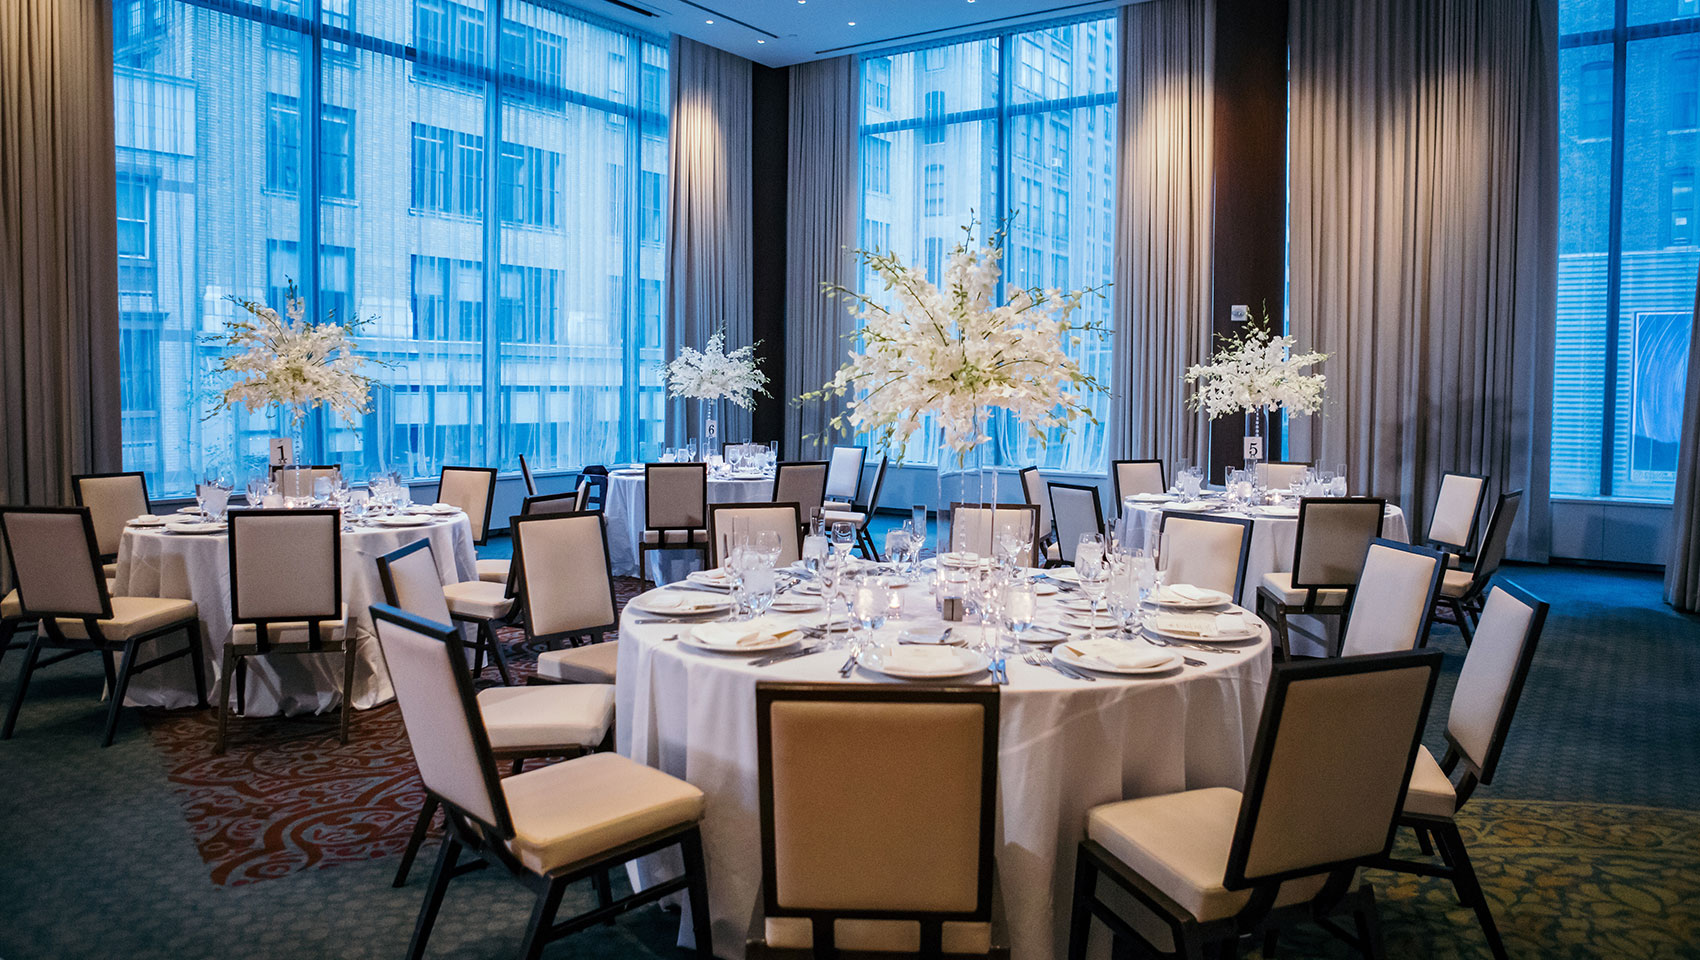 Ventana wedding set up with round tables that have place settings and tall floral arrangements next to large windows with city views